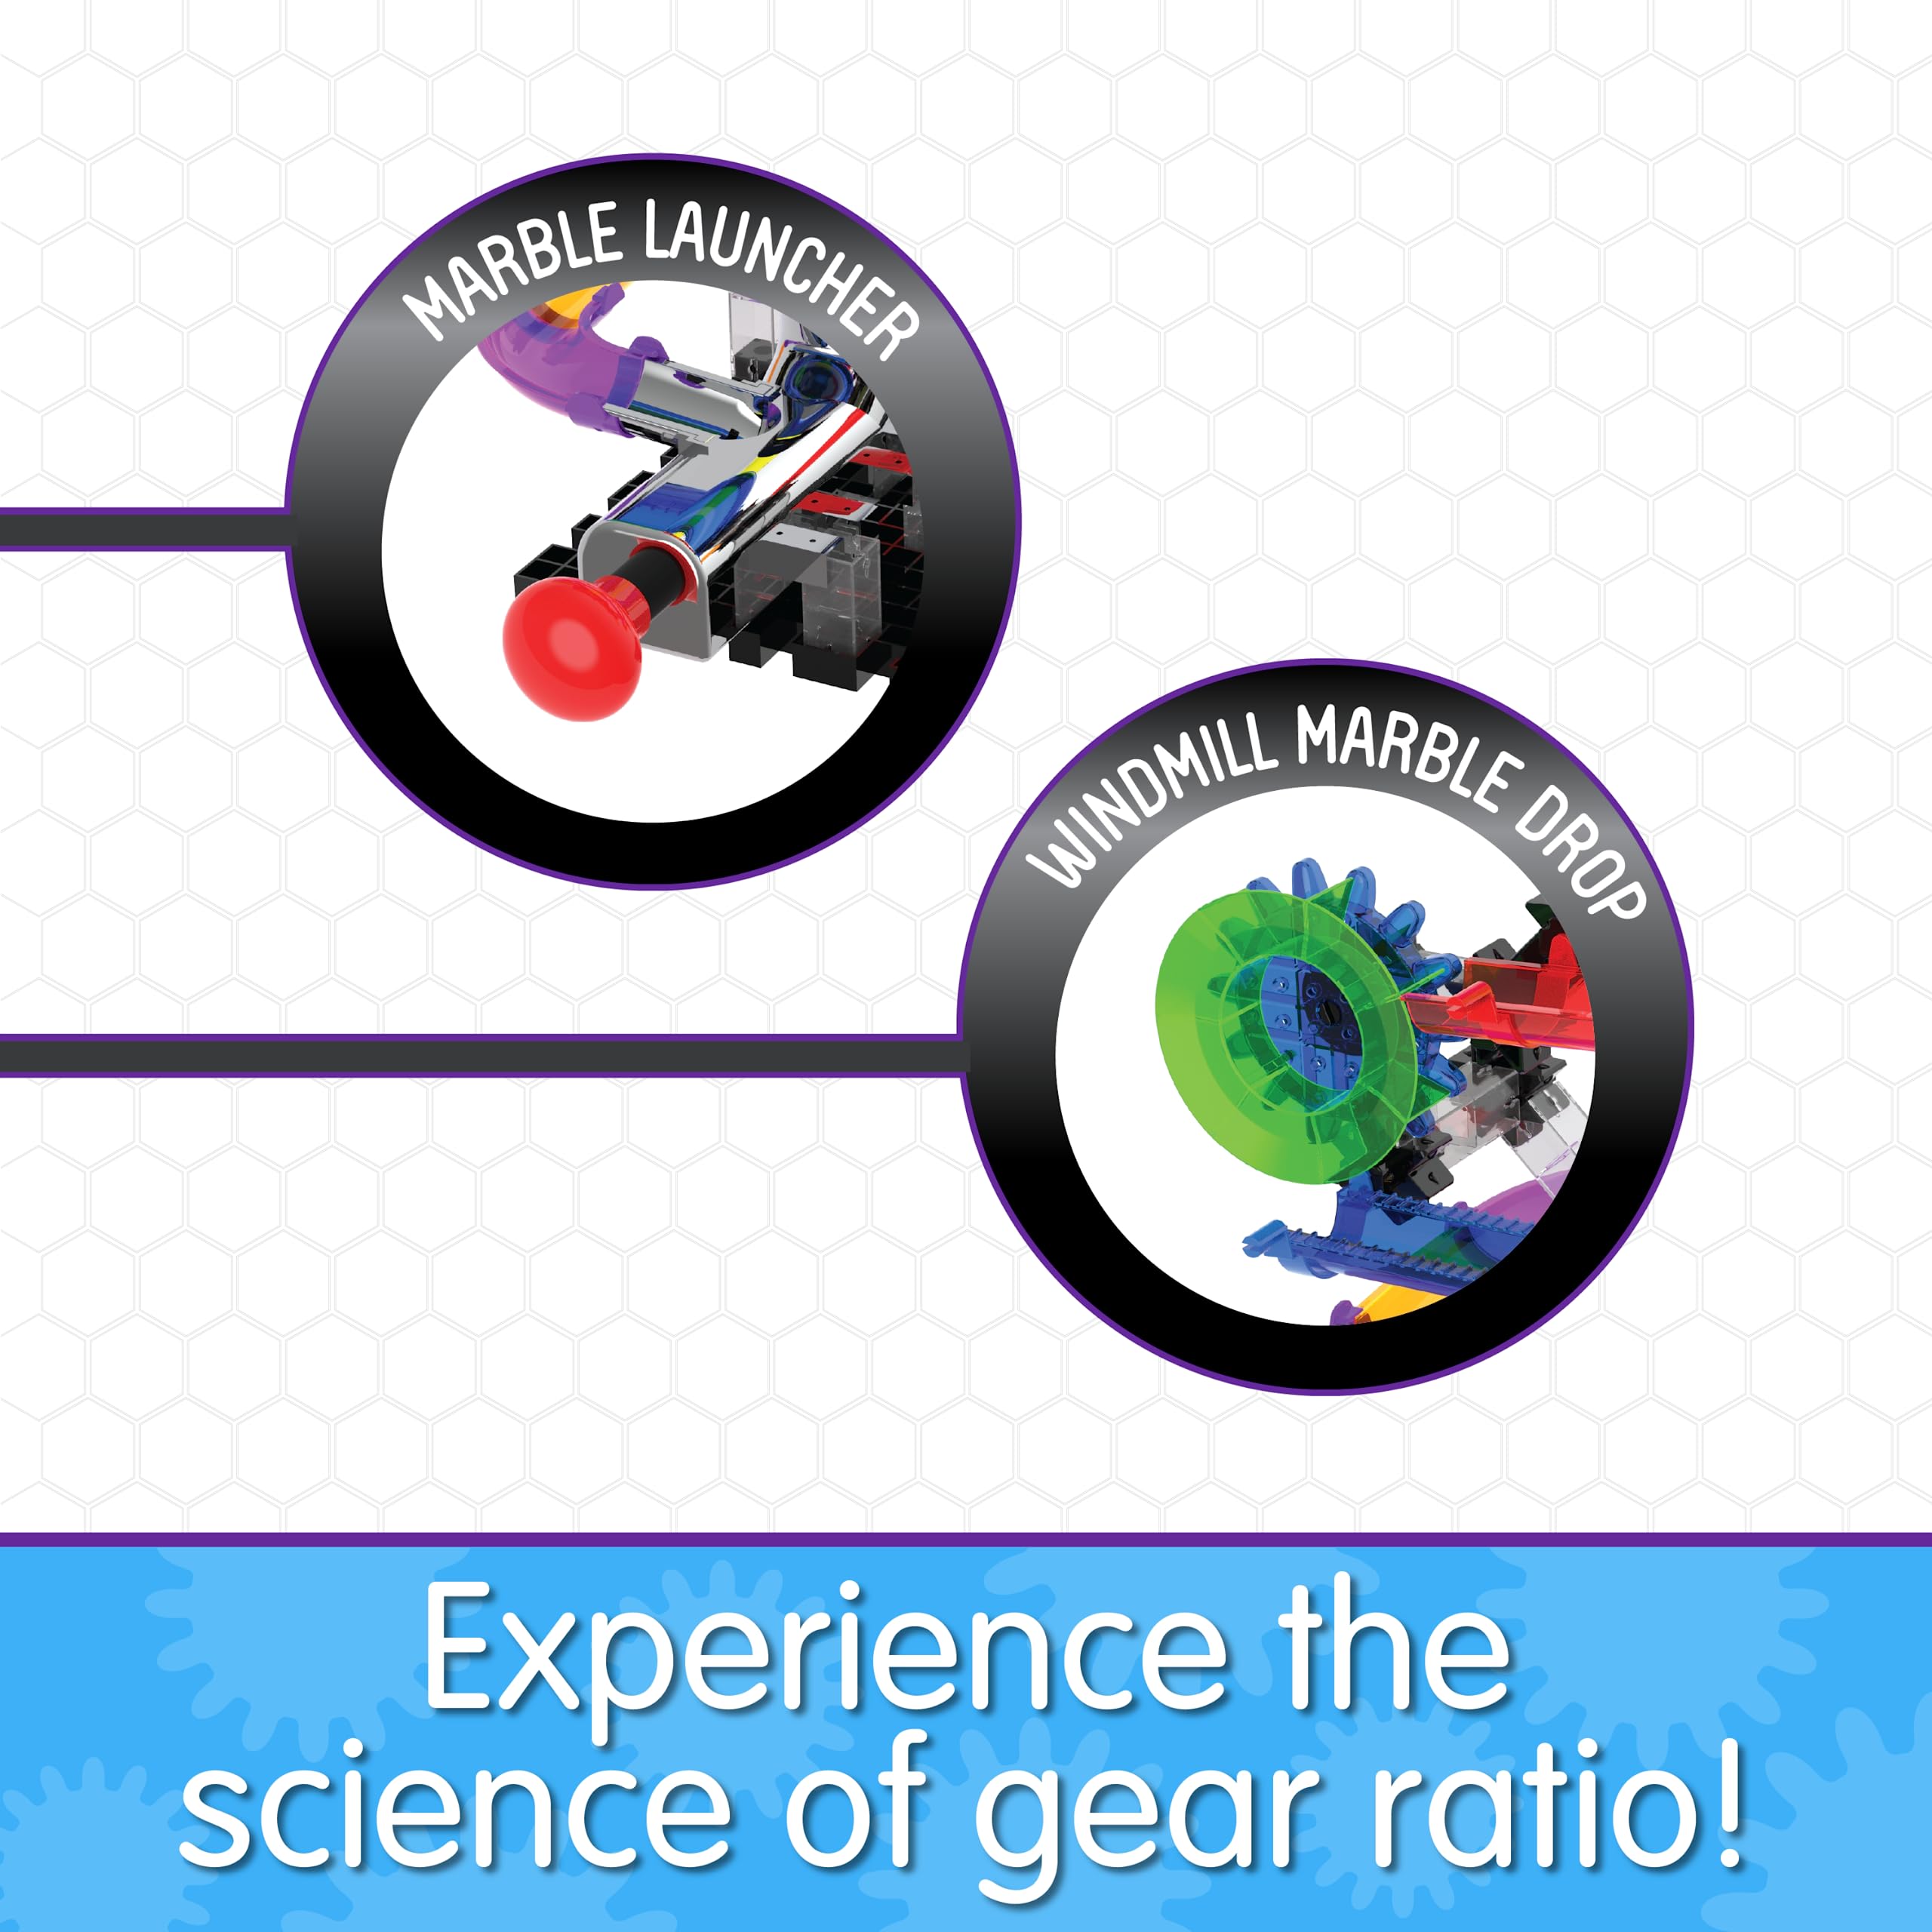 The Learning Journey - Techno Gears - Marble Mania - Hotshot 100+ Pieces - Marble Runs for Kids - STEM Toys for Boys & Girls Ages 6-12 Years - Award Winning Toys (567890)